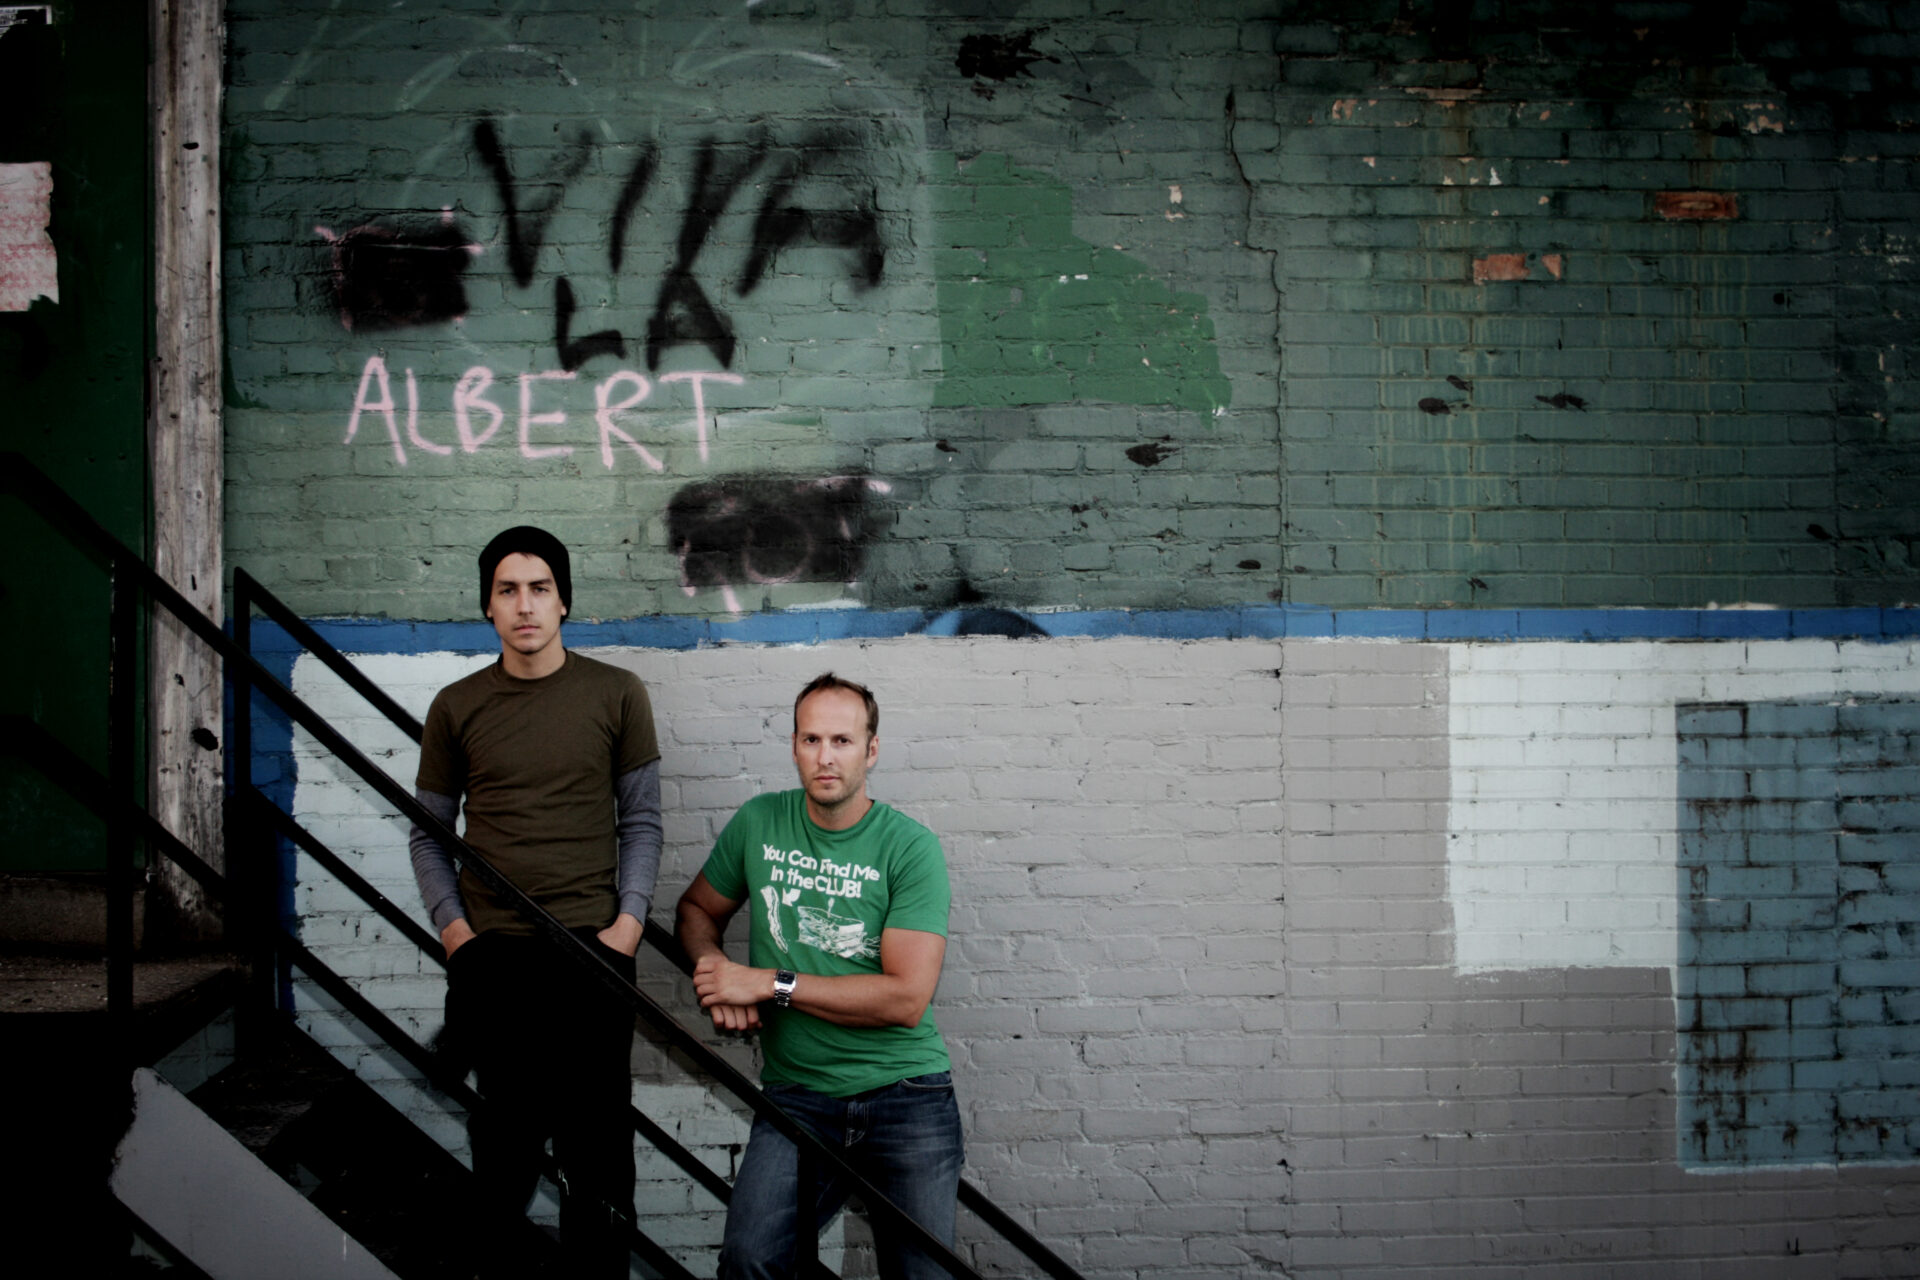 Jeff Newman and Randy Frykas stand on a back-alley stairway, overtop of them is spray paint graffiti that reads "Viva La Albert"